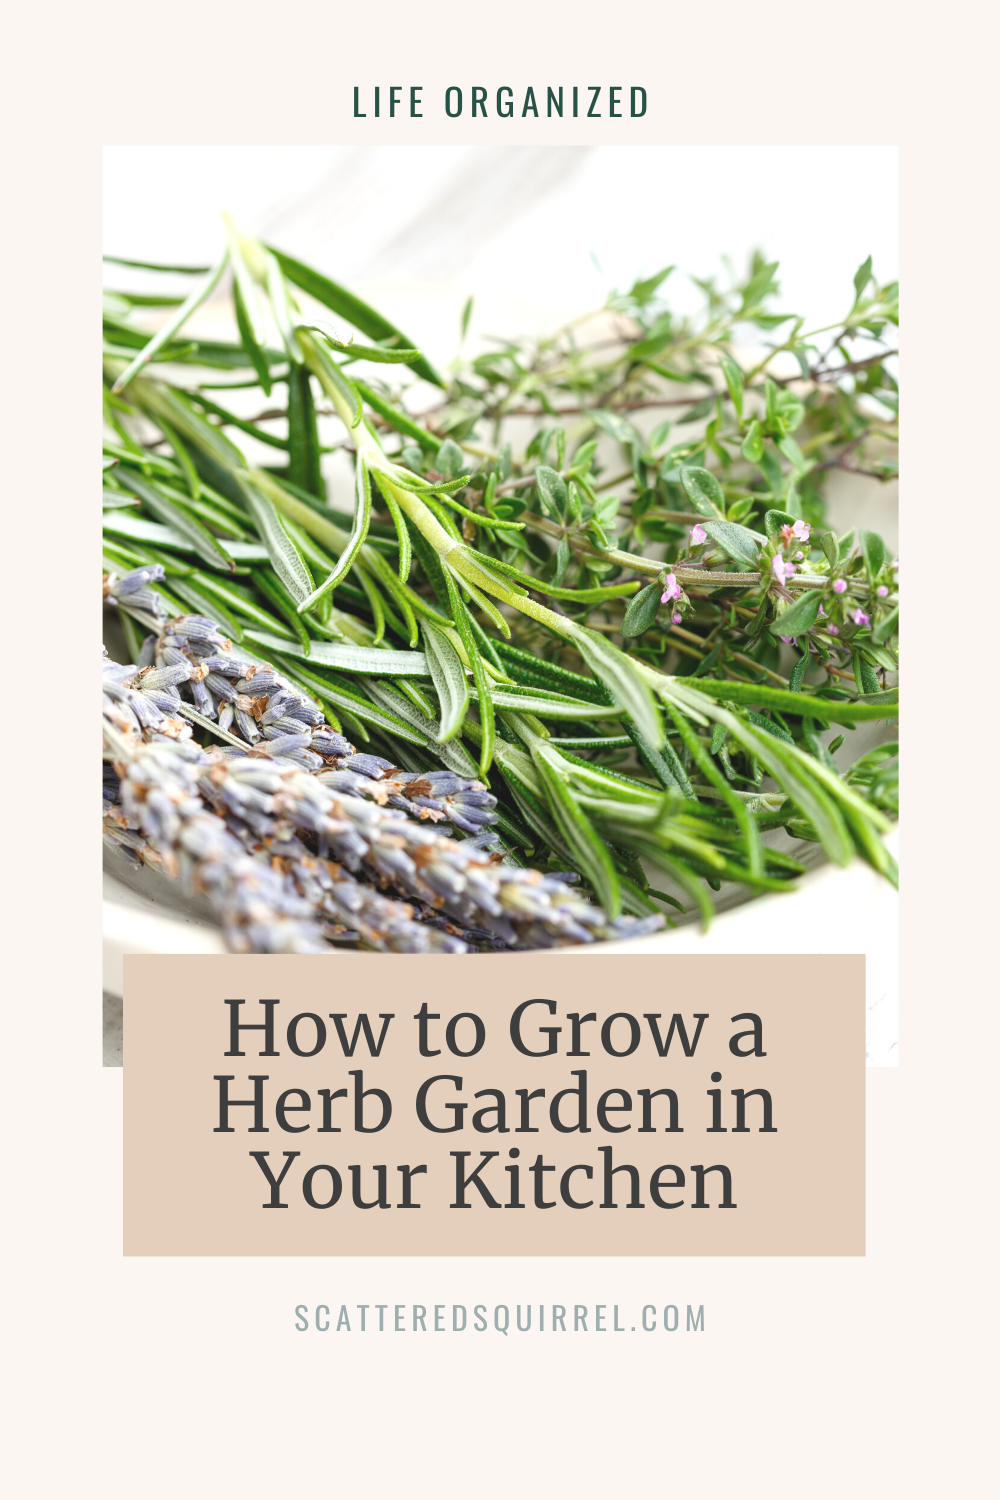 How to Grow a Herb Garden in Your Kitchen